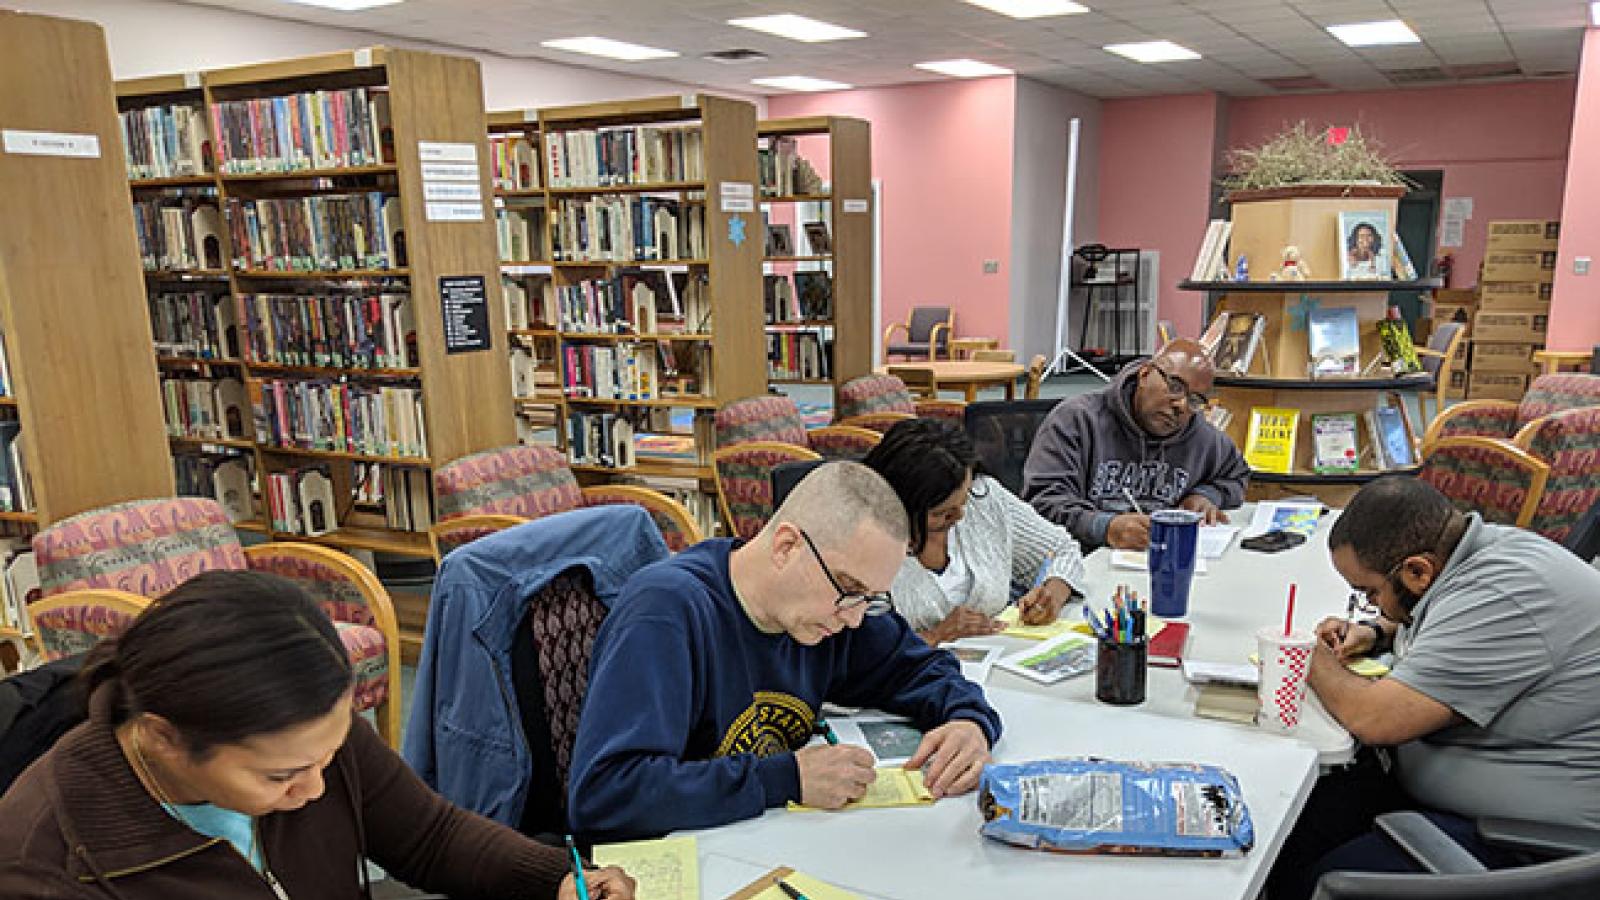 With library stacks in the background, men and women sit around a table and write on yellow legal pads